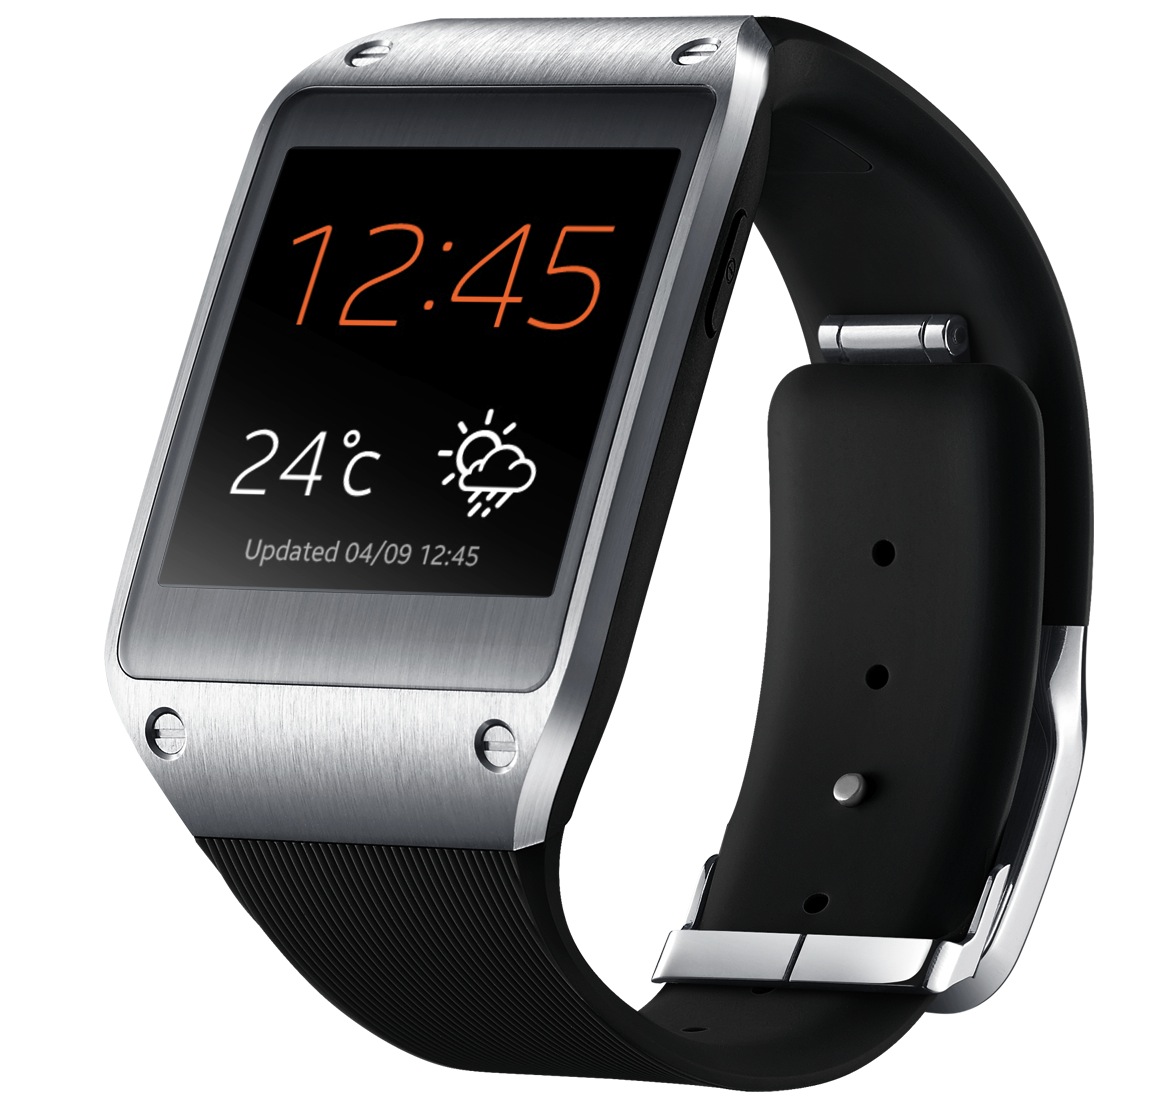 Samsung Gear A Will be Have a WiFi and 3G Support